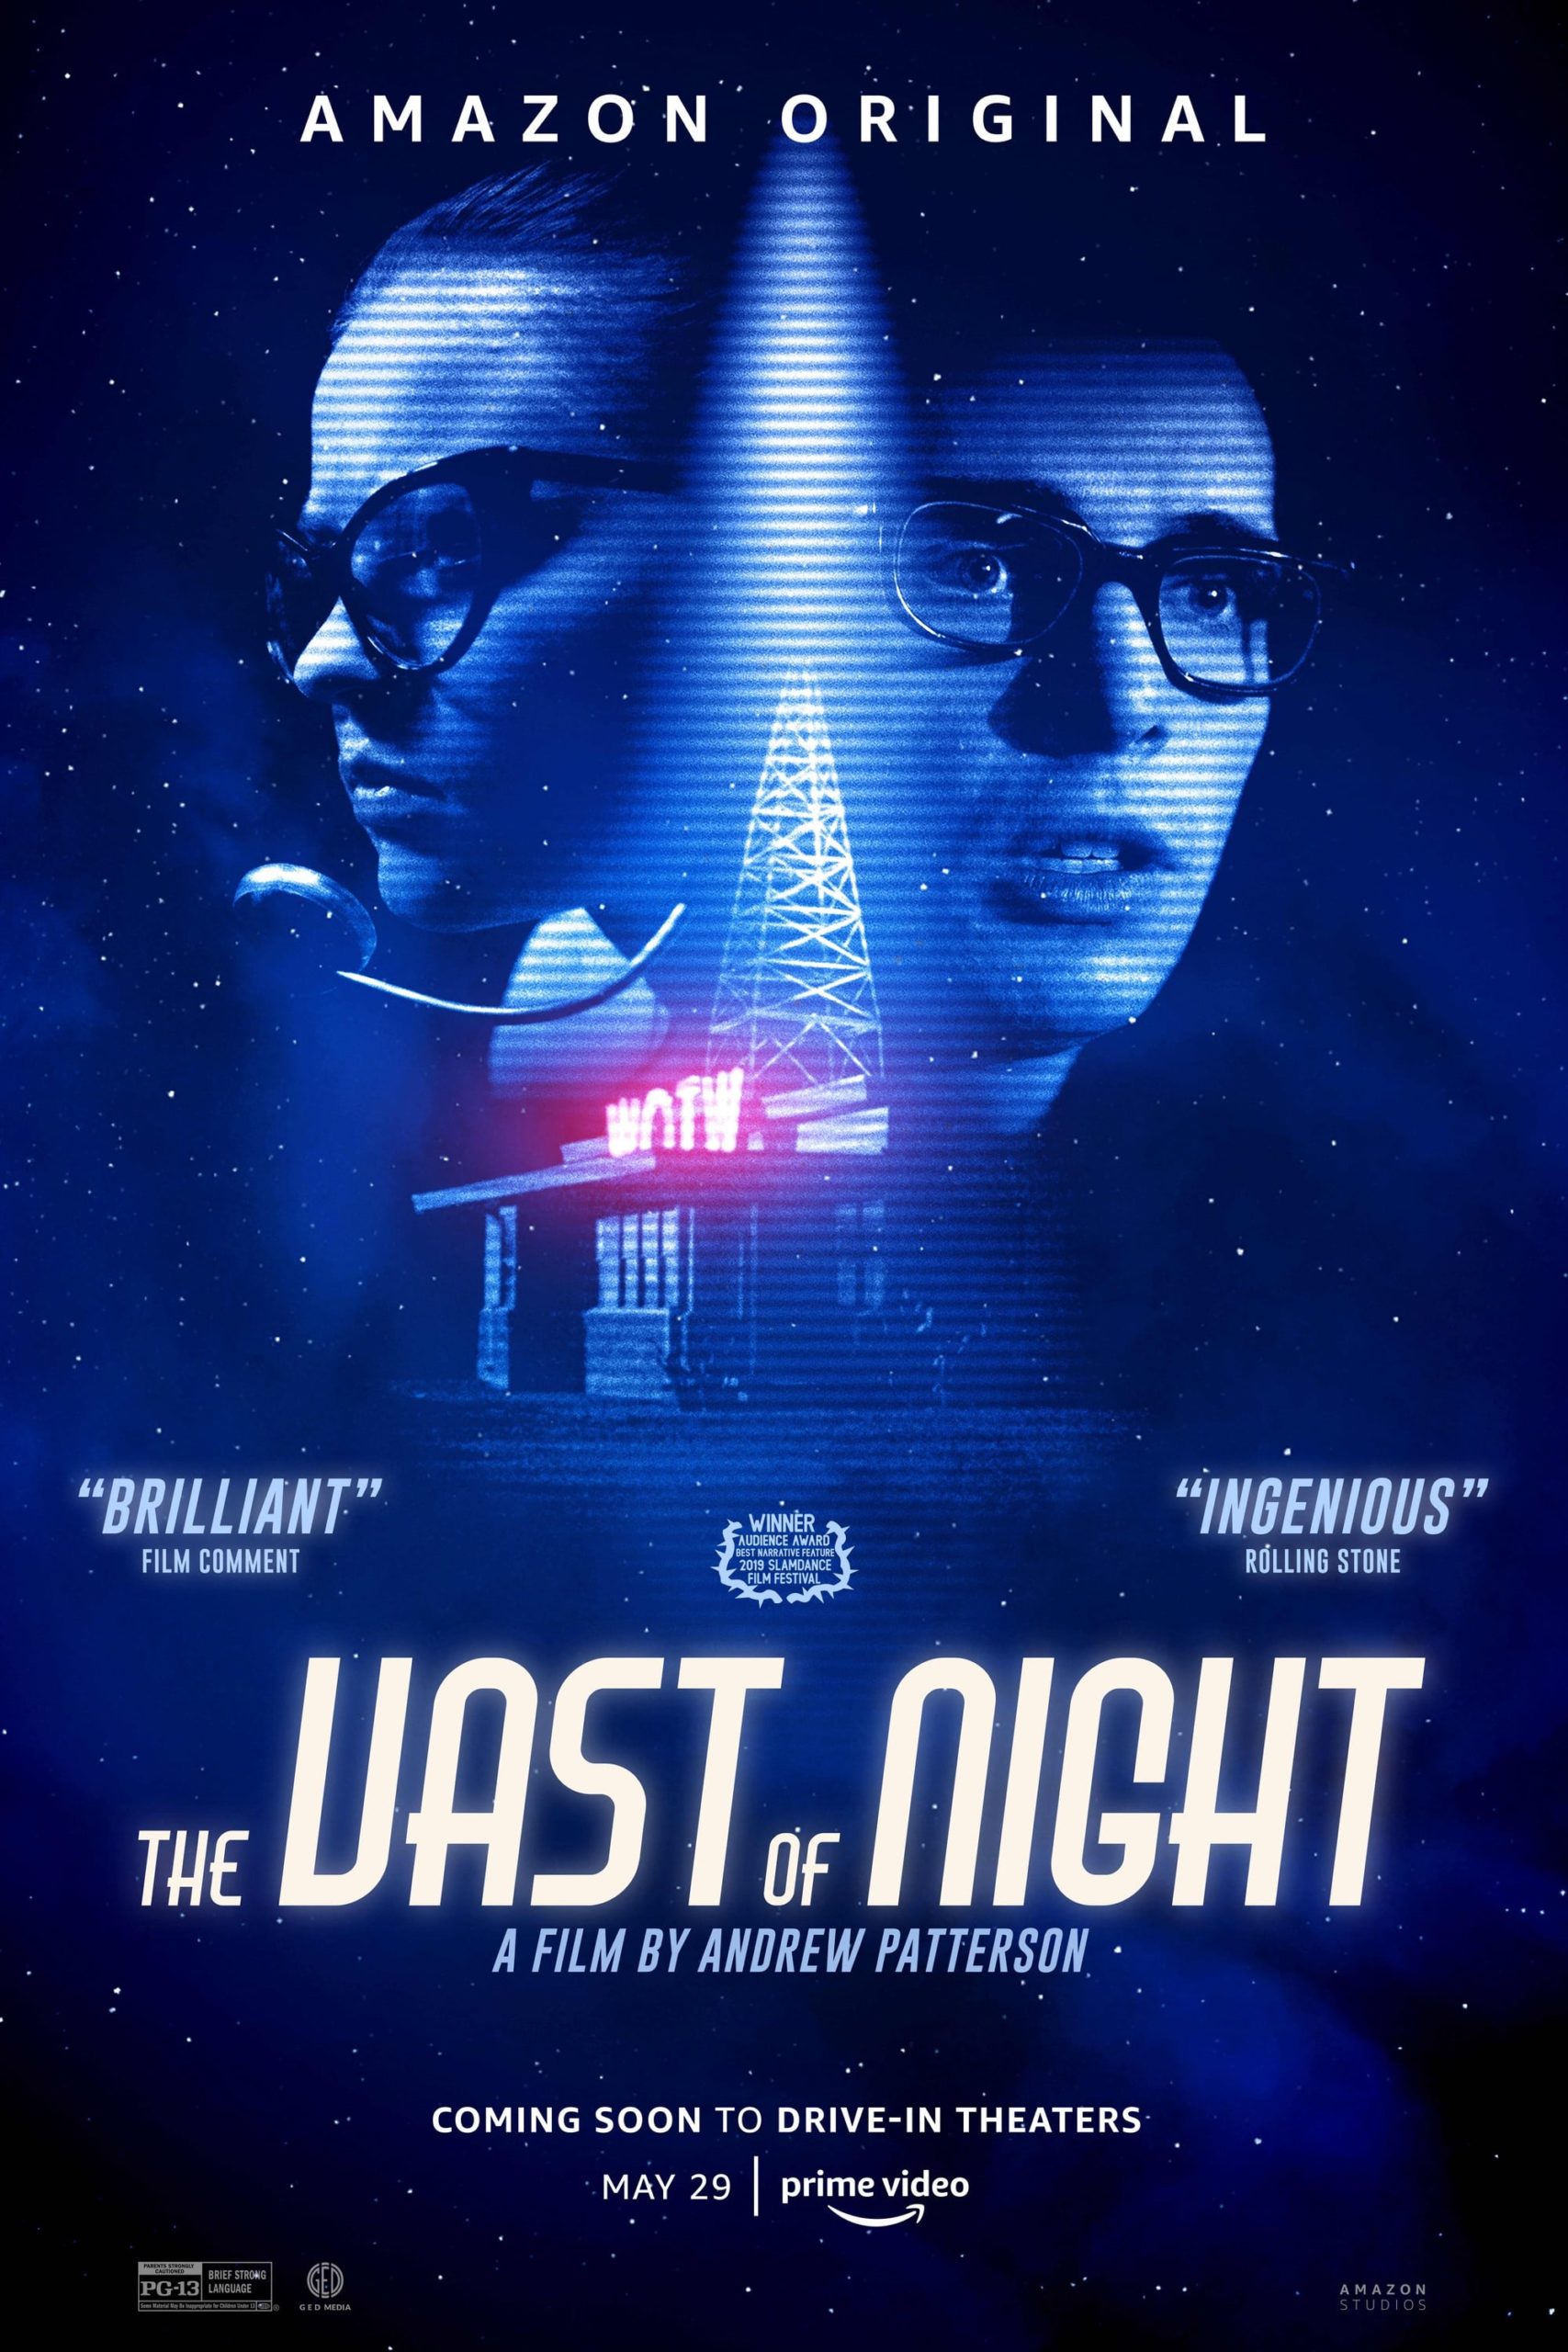 movie review the vast of night